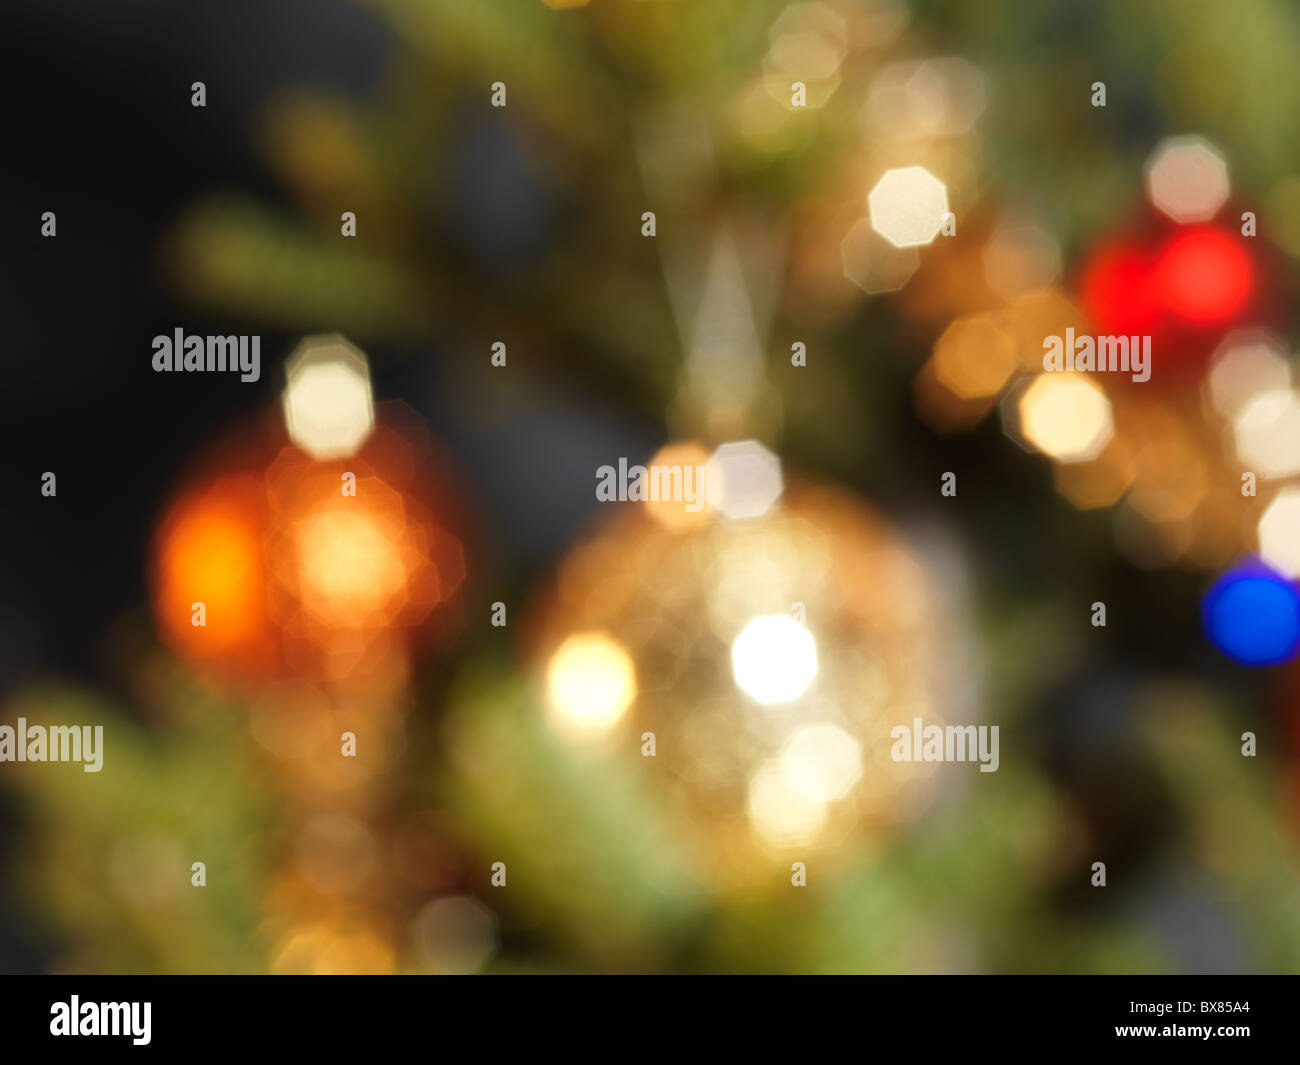 Out of focus decorated Christmas tree abstract colorful background Stock Photo